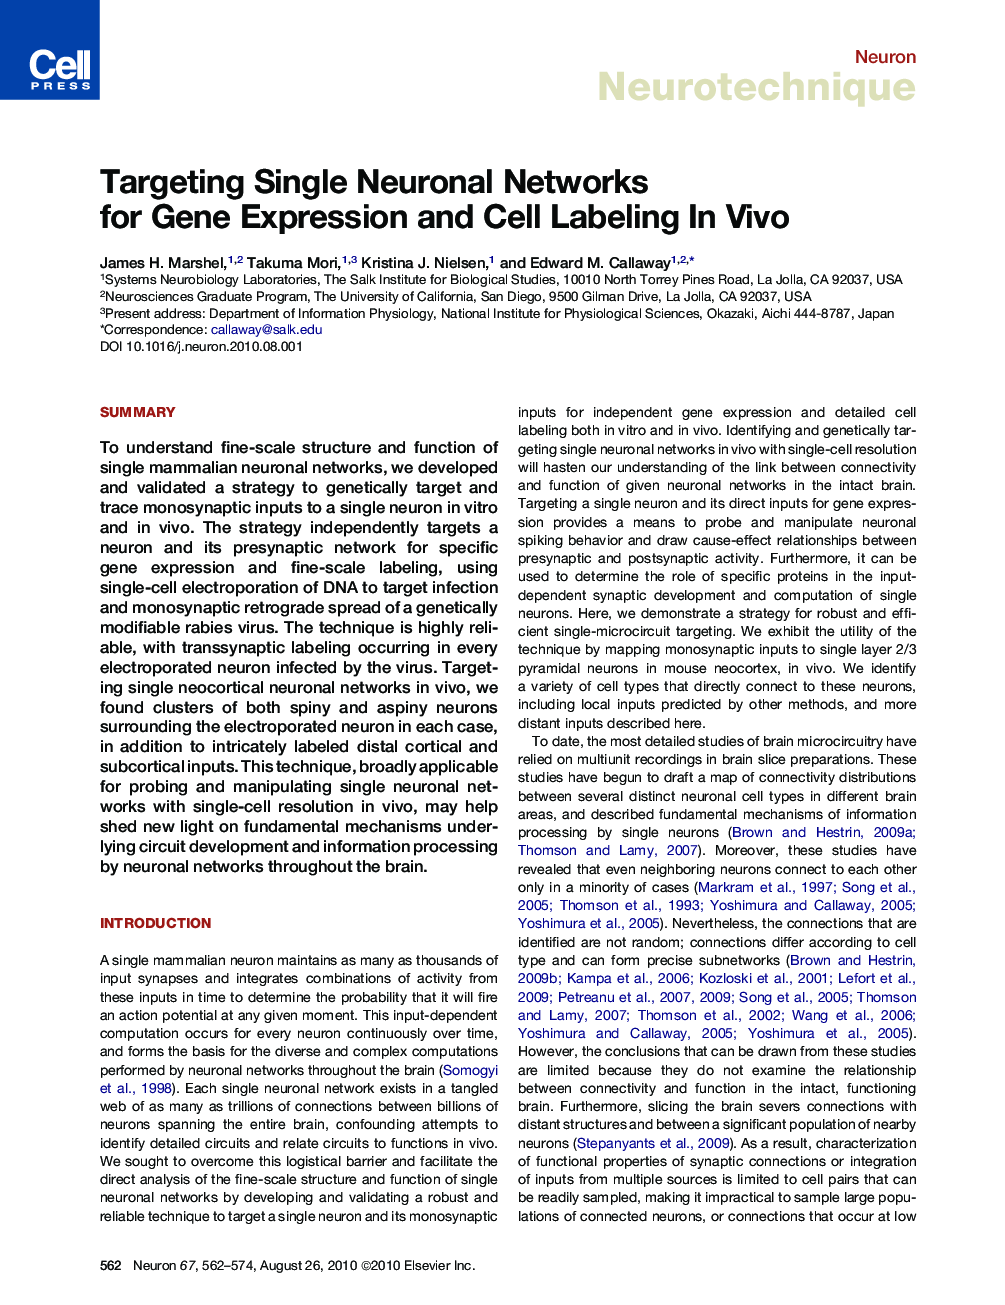 Targeting Single Neuronal Networks for Gene Expression and Cell Labeling In Vivo